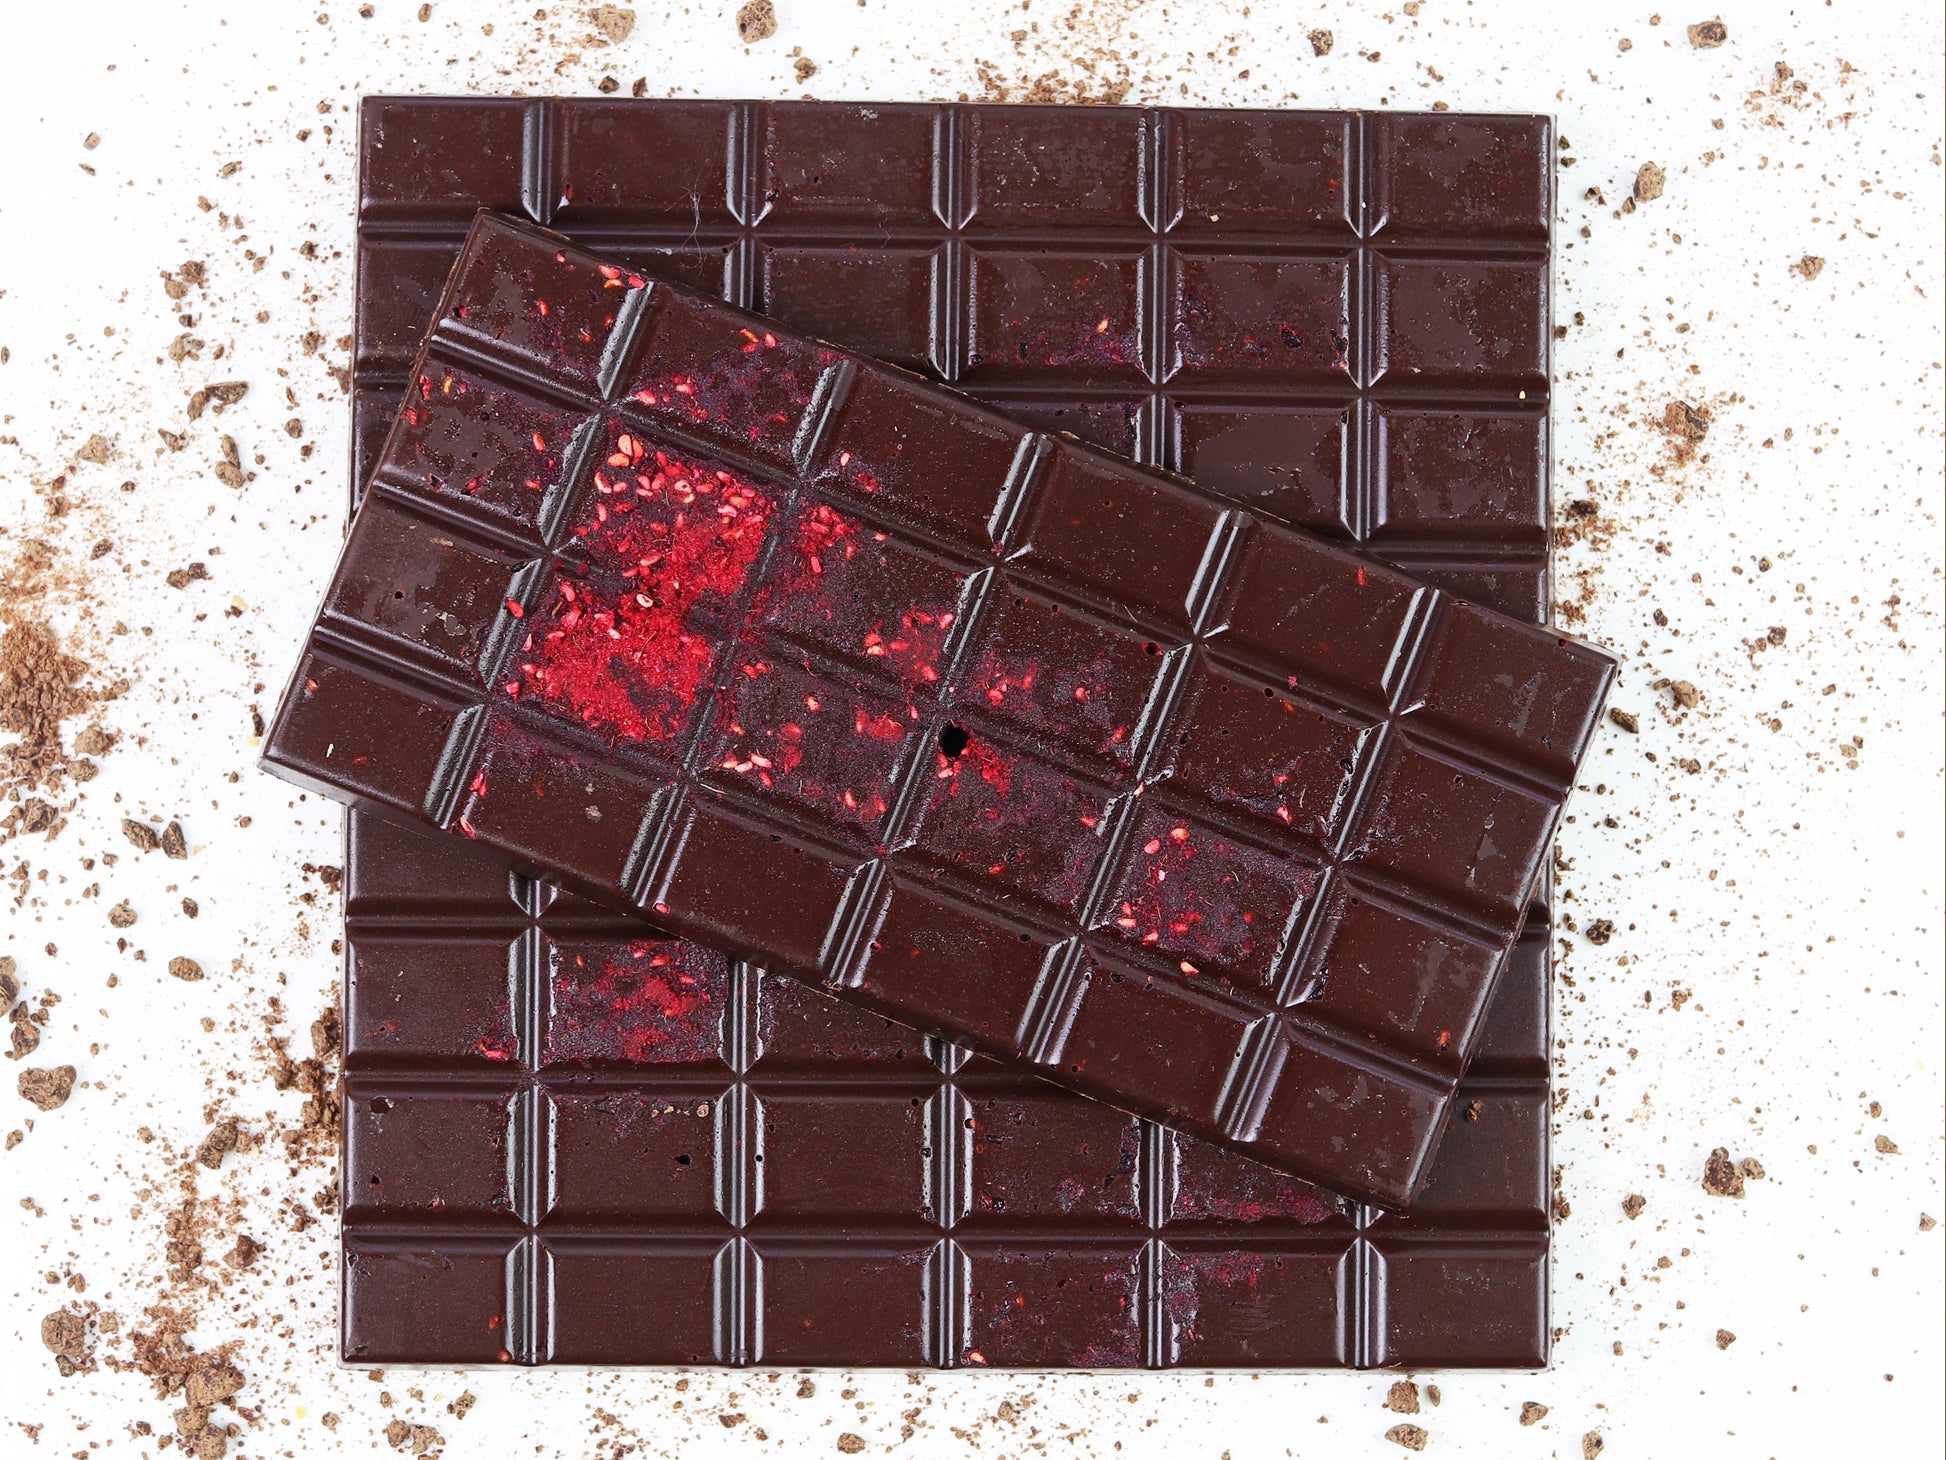 image shows front view of 3, 100g hand made dark chocolate raspberry bars.